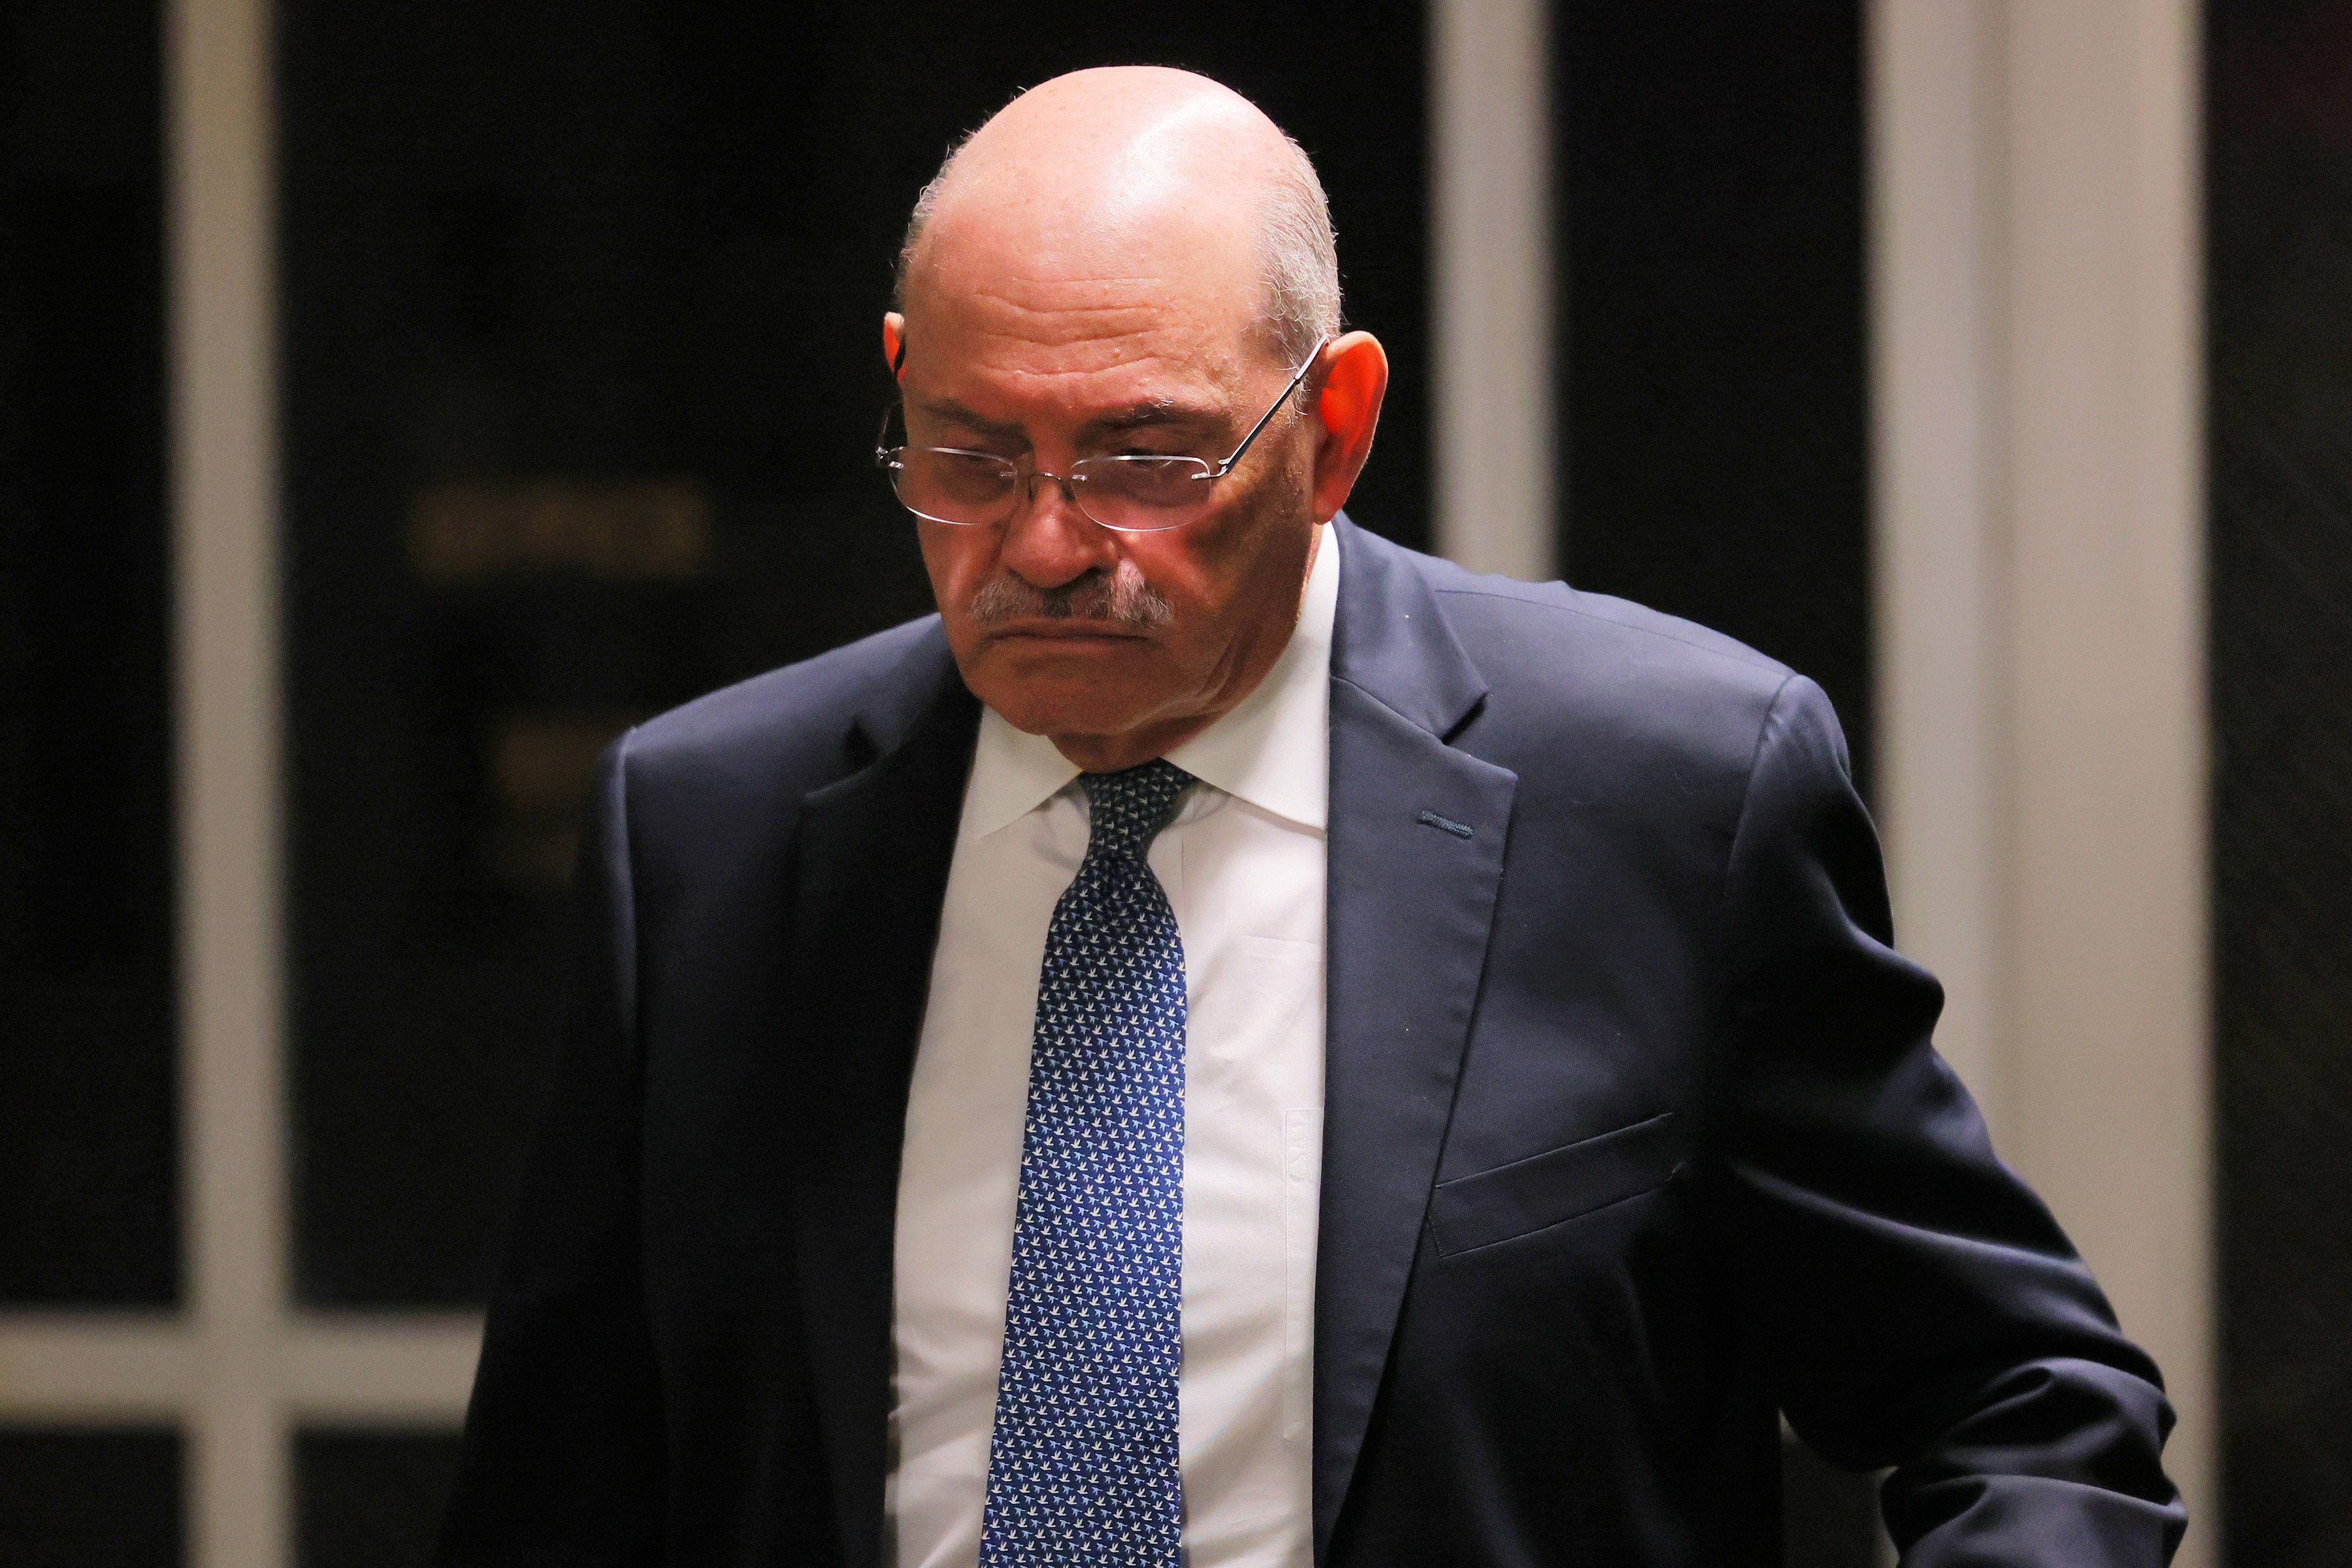 Retired Trump Organisation CFO Allen Weisselberg has just been sentenced to 5 months in prison for perjury. Photo: Getty Images/TNS